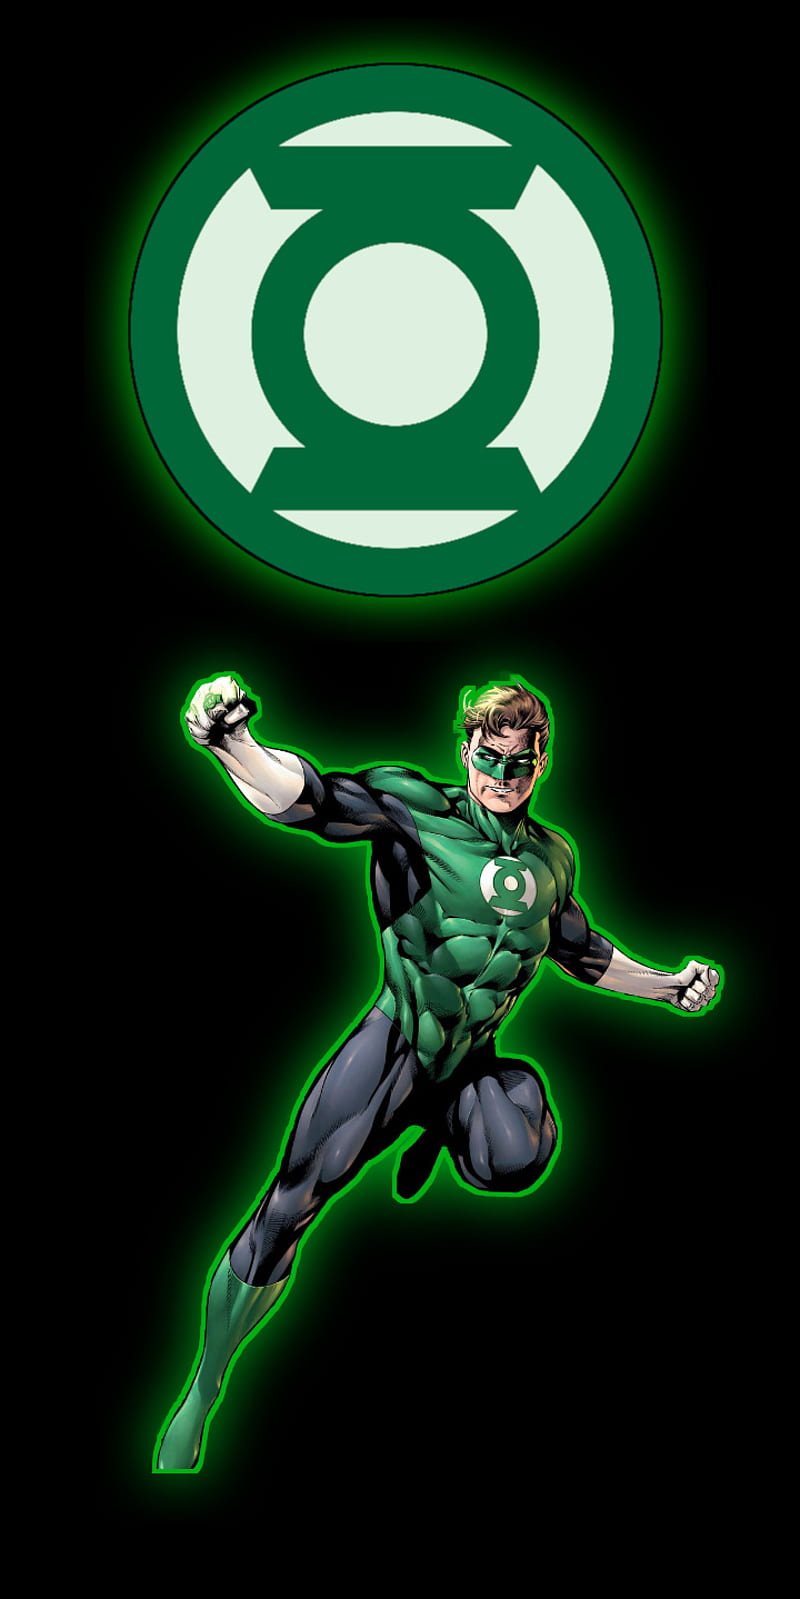 What does the Green Lantern symbol mean? - Quora